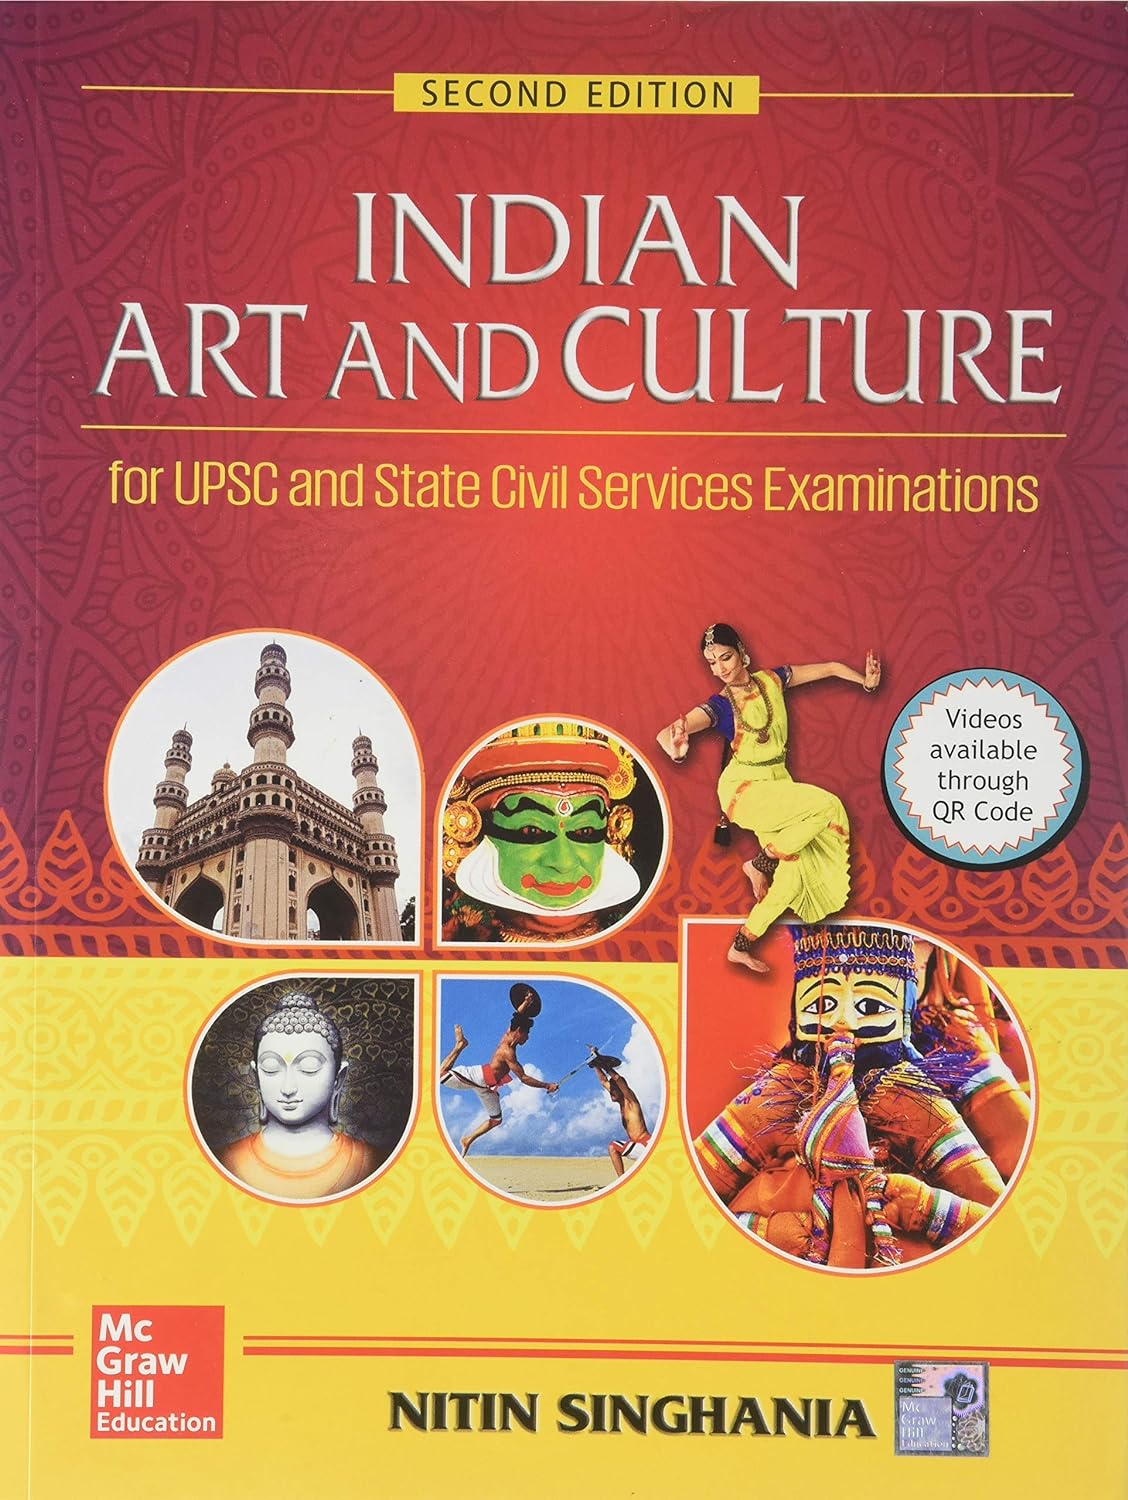 Indian Art and Culture for UPSC and State Civil Services Examinations (Nitin Singhania)